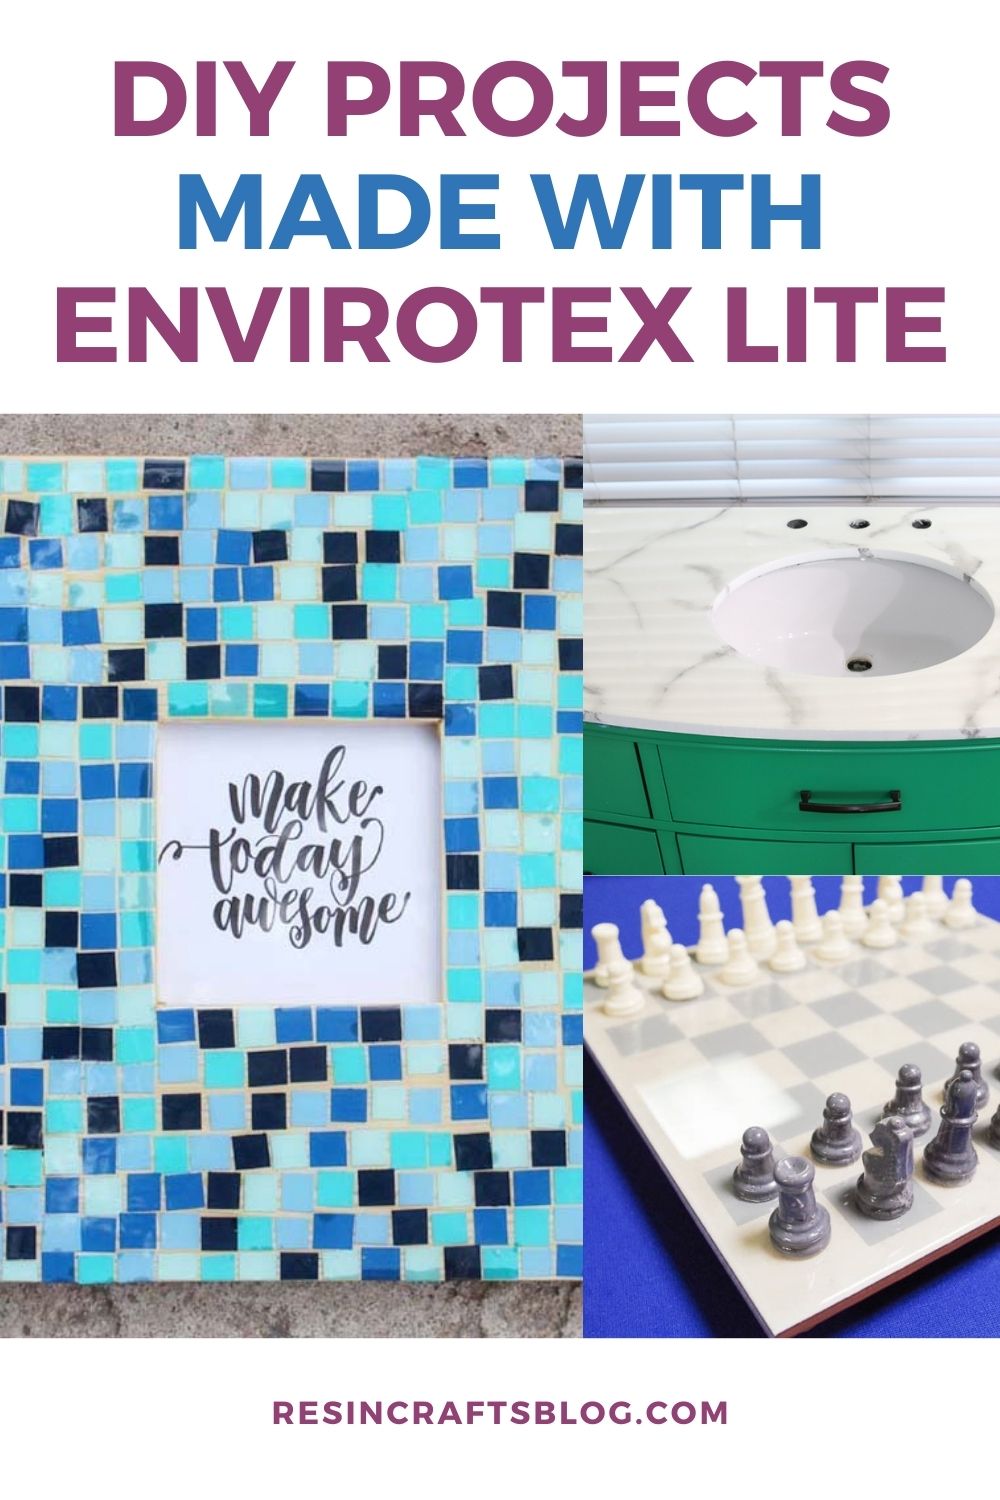 Using EnviroTex Lite Resin For Jewelry Making - HubPages